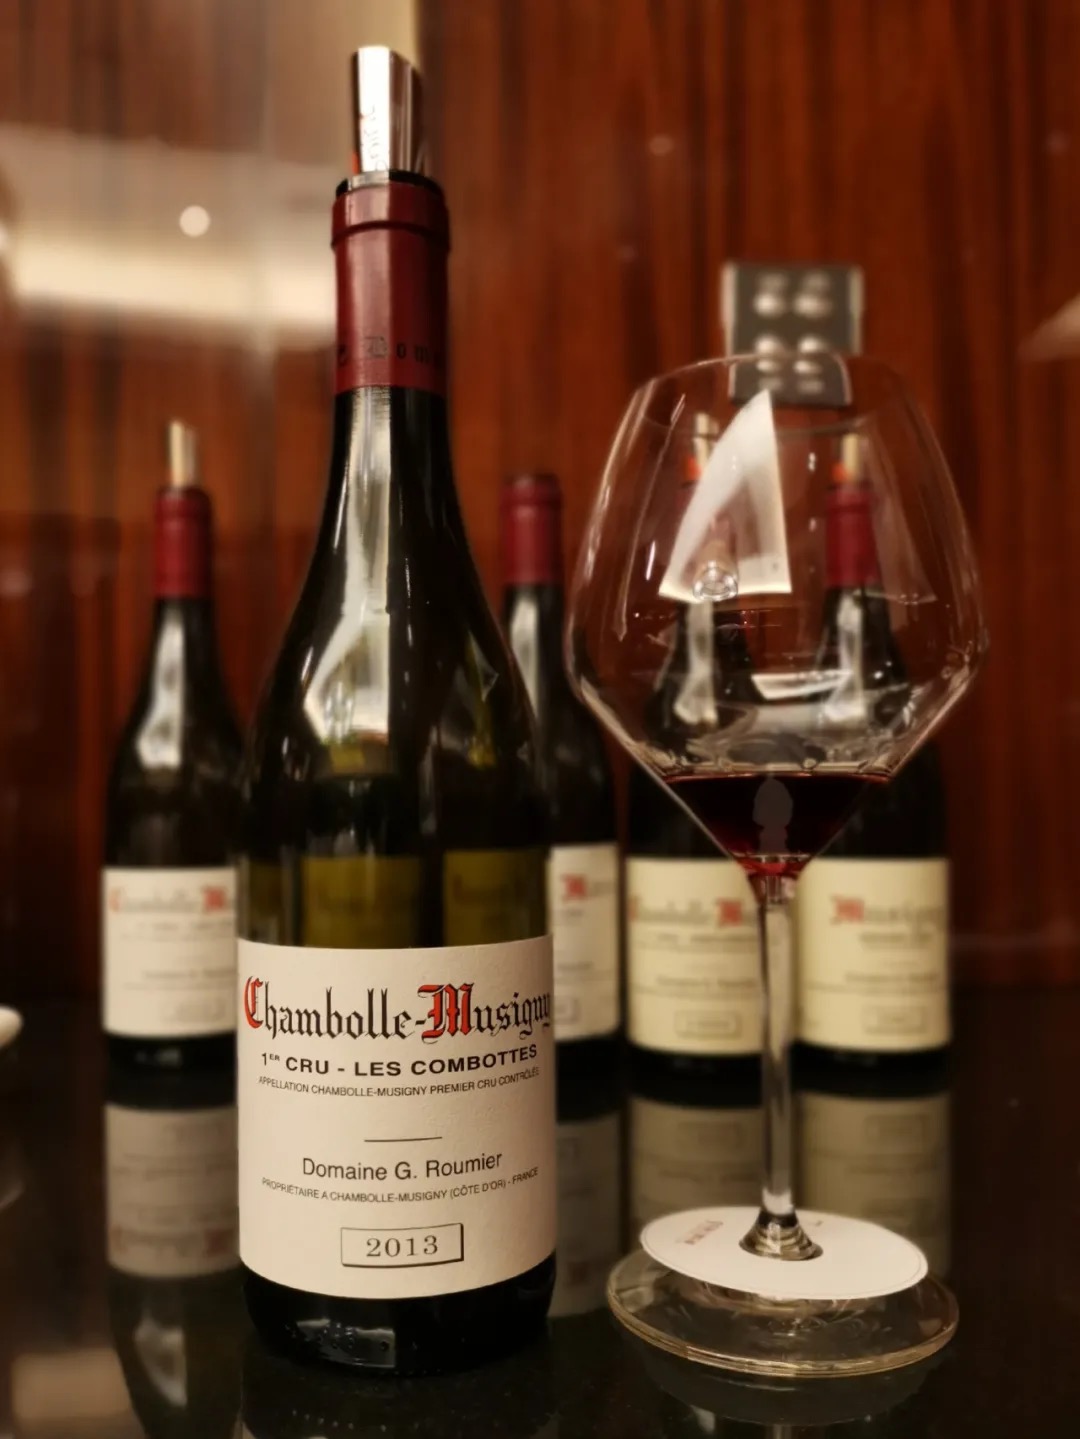 Domaine-Georges-Roumier-Chambolle-Musigny-1er-Cru-Les-Combottes-1-1-1-1-1-2-1